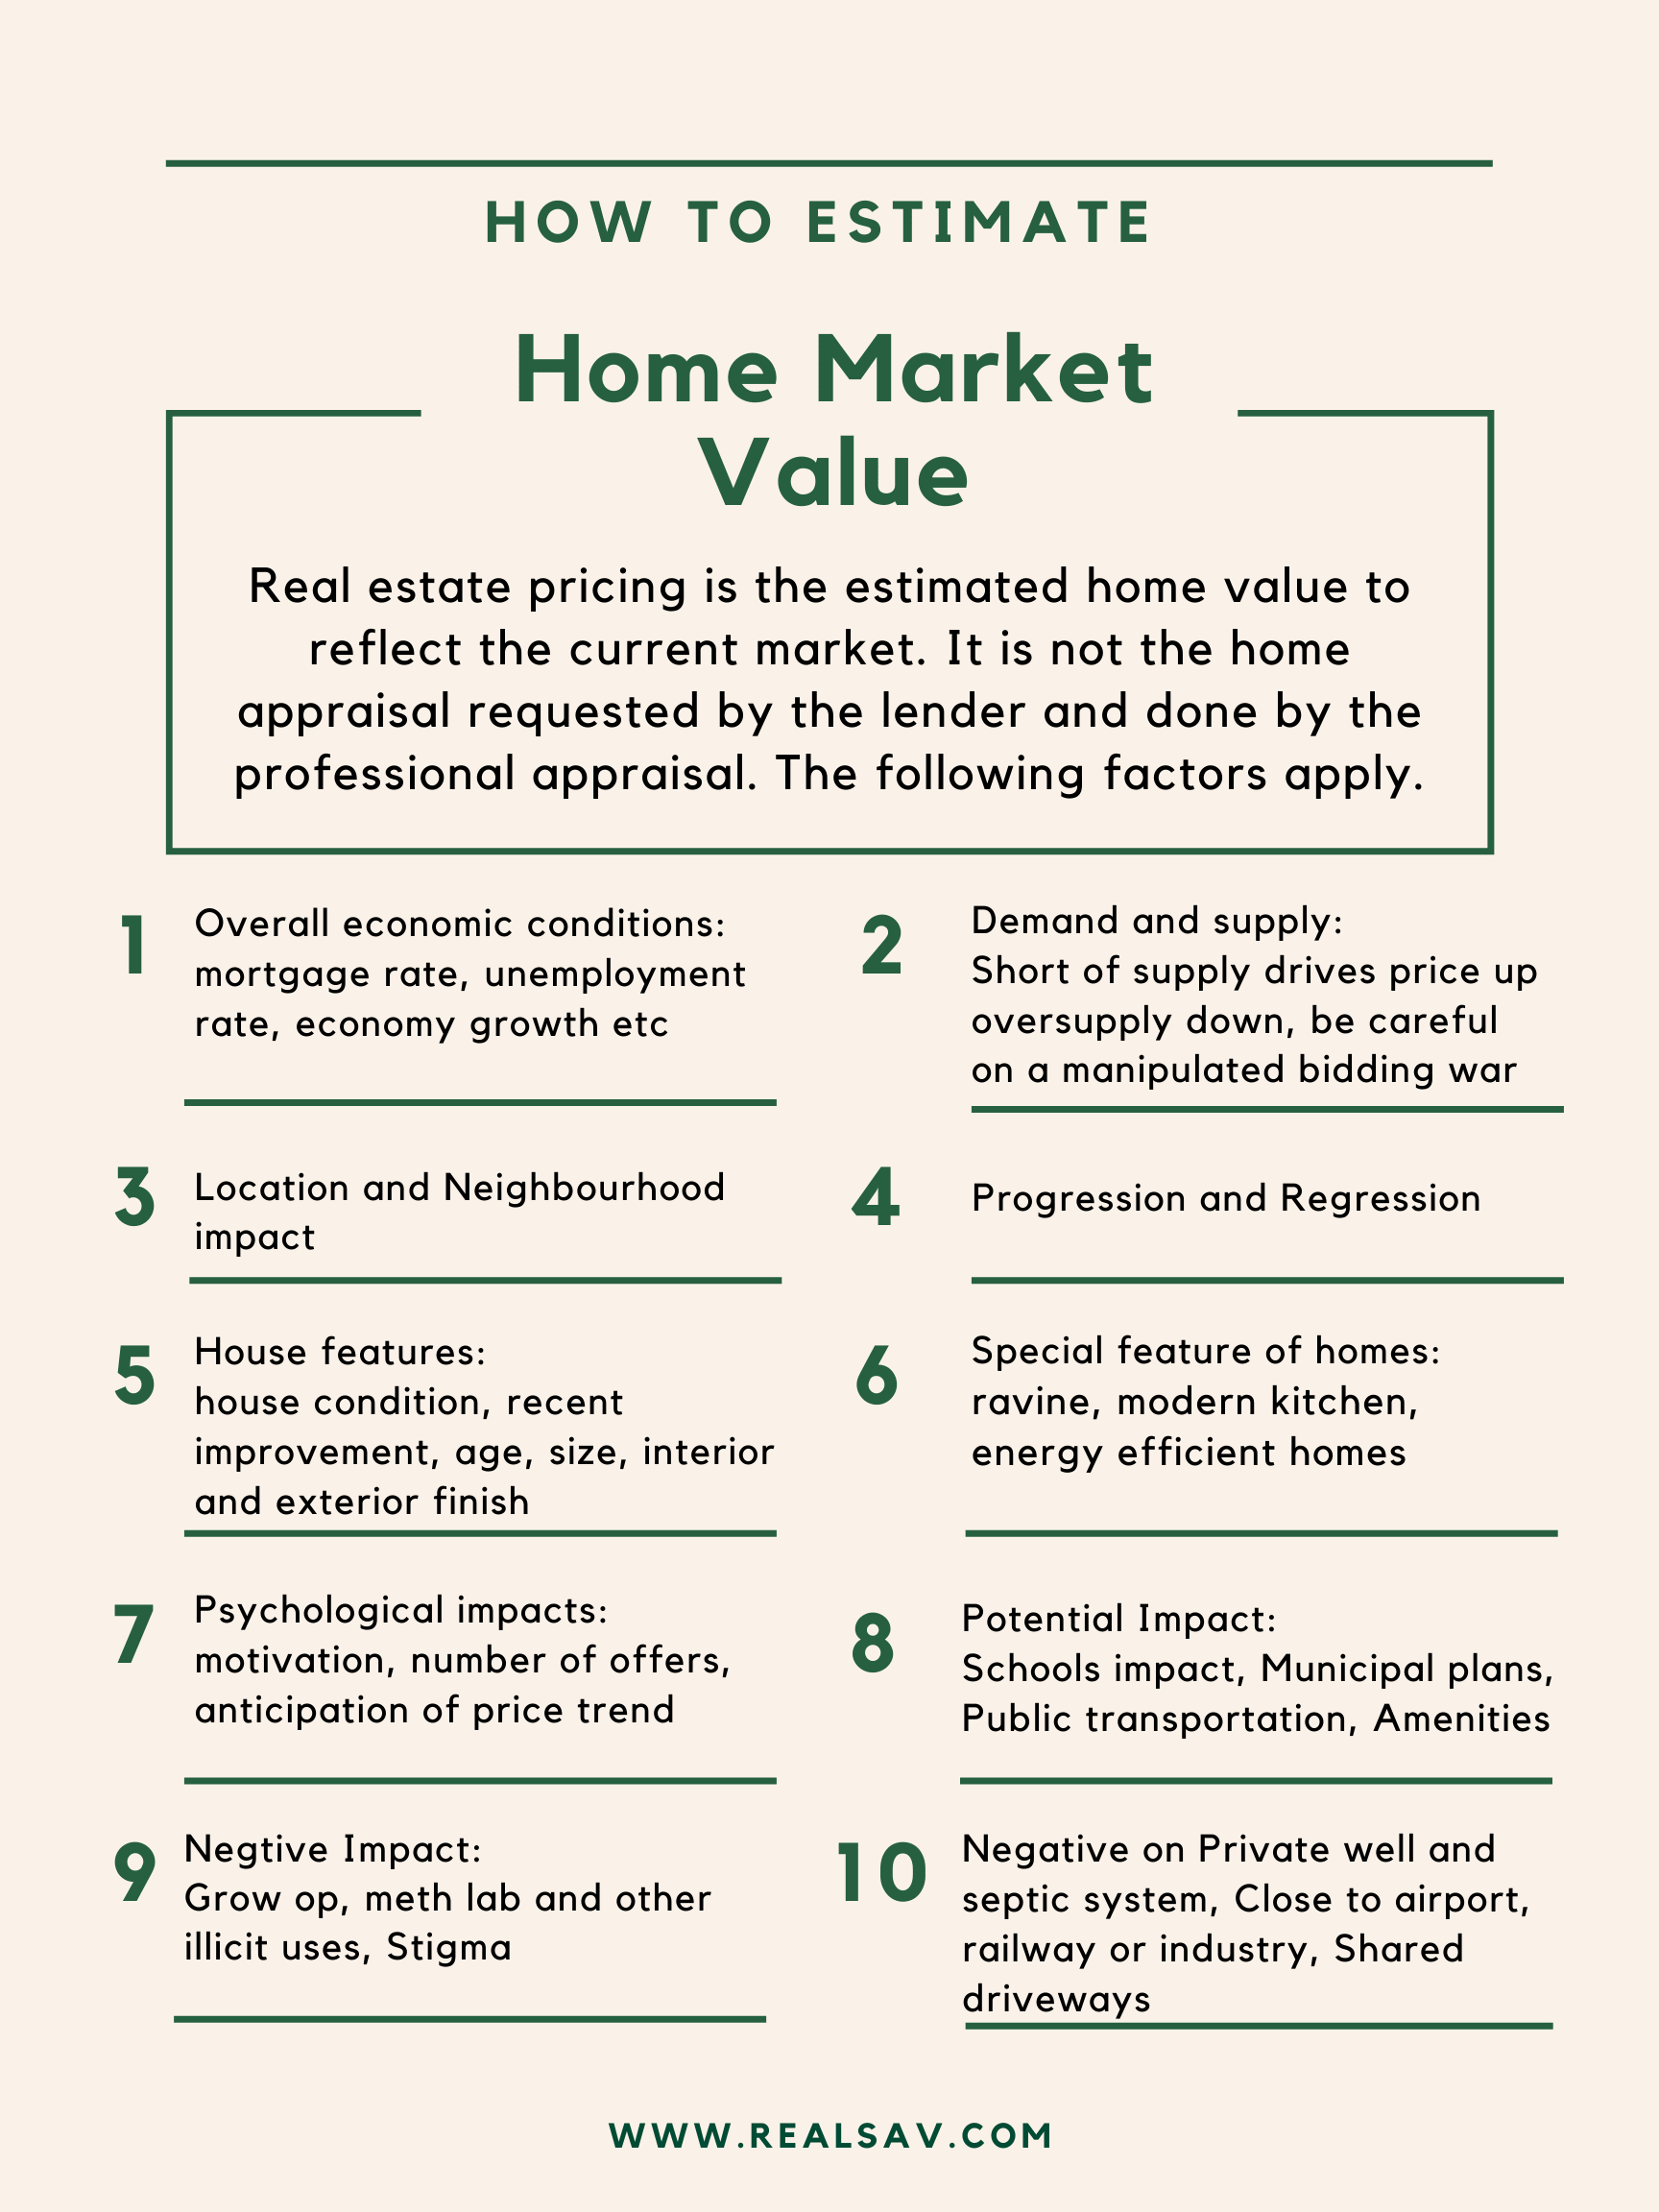 Main factors are listed to estimate a home value